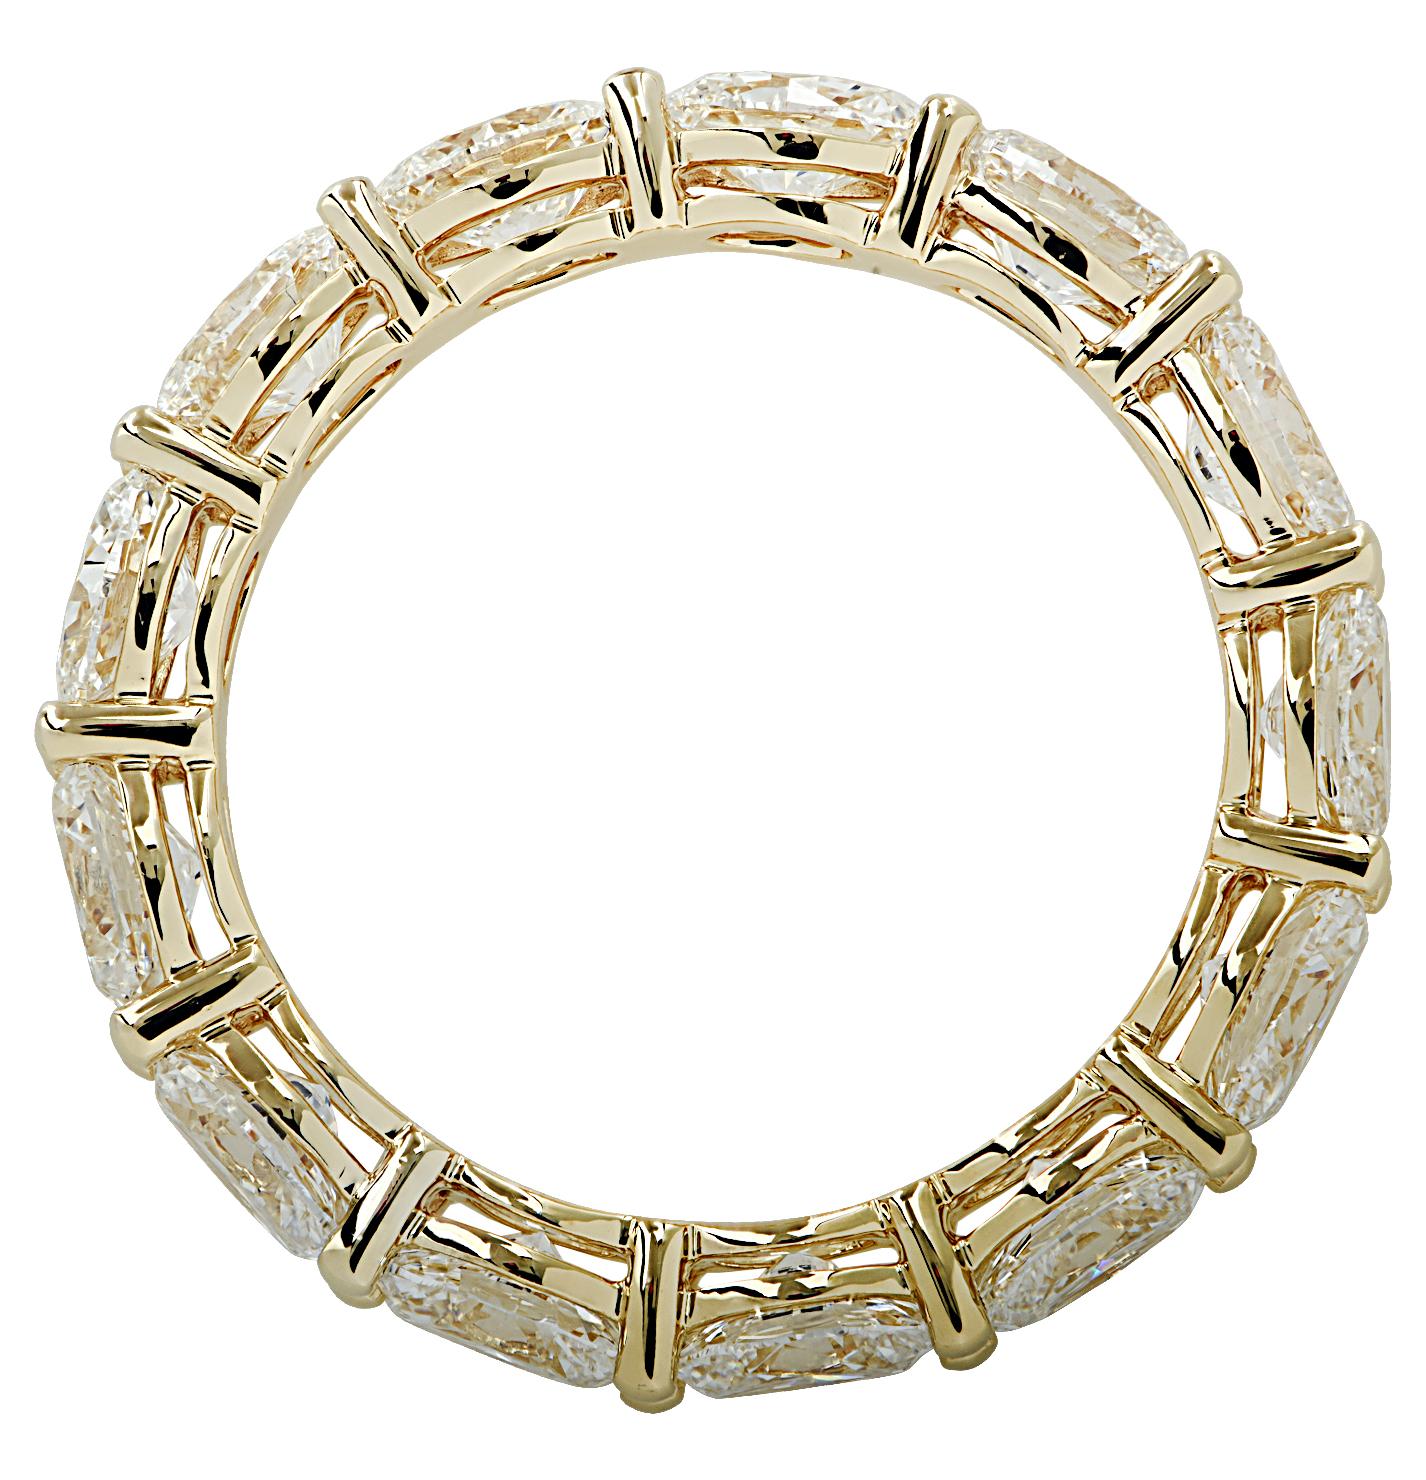 Stunning Vivid Diamonds Eternity Band crafted in 18 karat yellow gold, featuring 13 oval cut diamonds weighing 3.08 carats total, E-F color, VS clarity. The diamonds were carefully selected, perfectly matched and set East-West in a spectacular